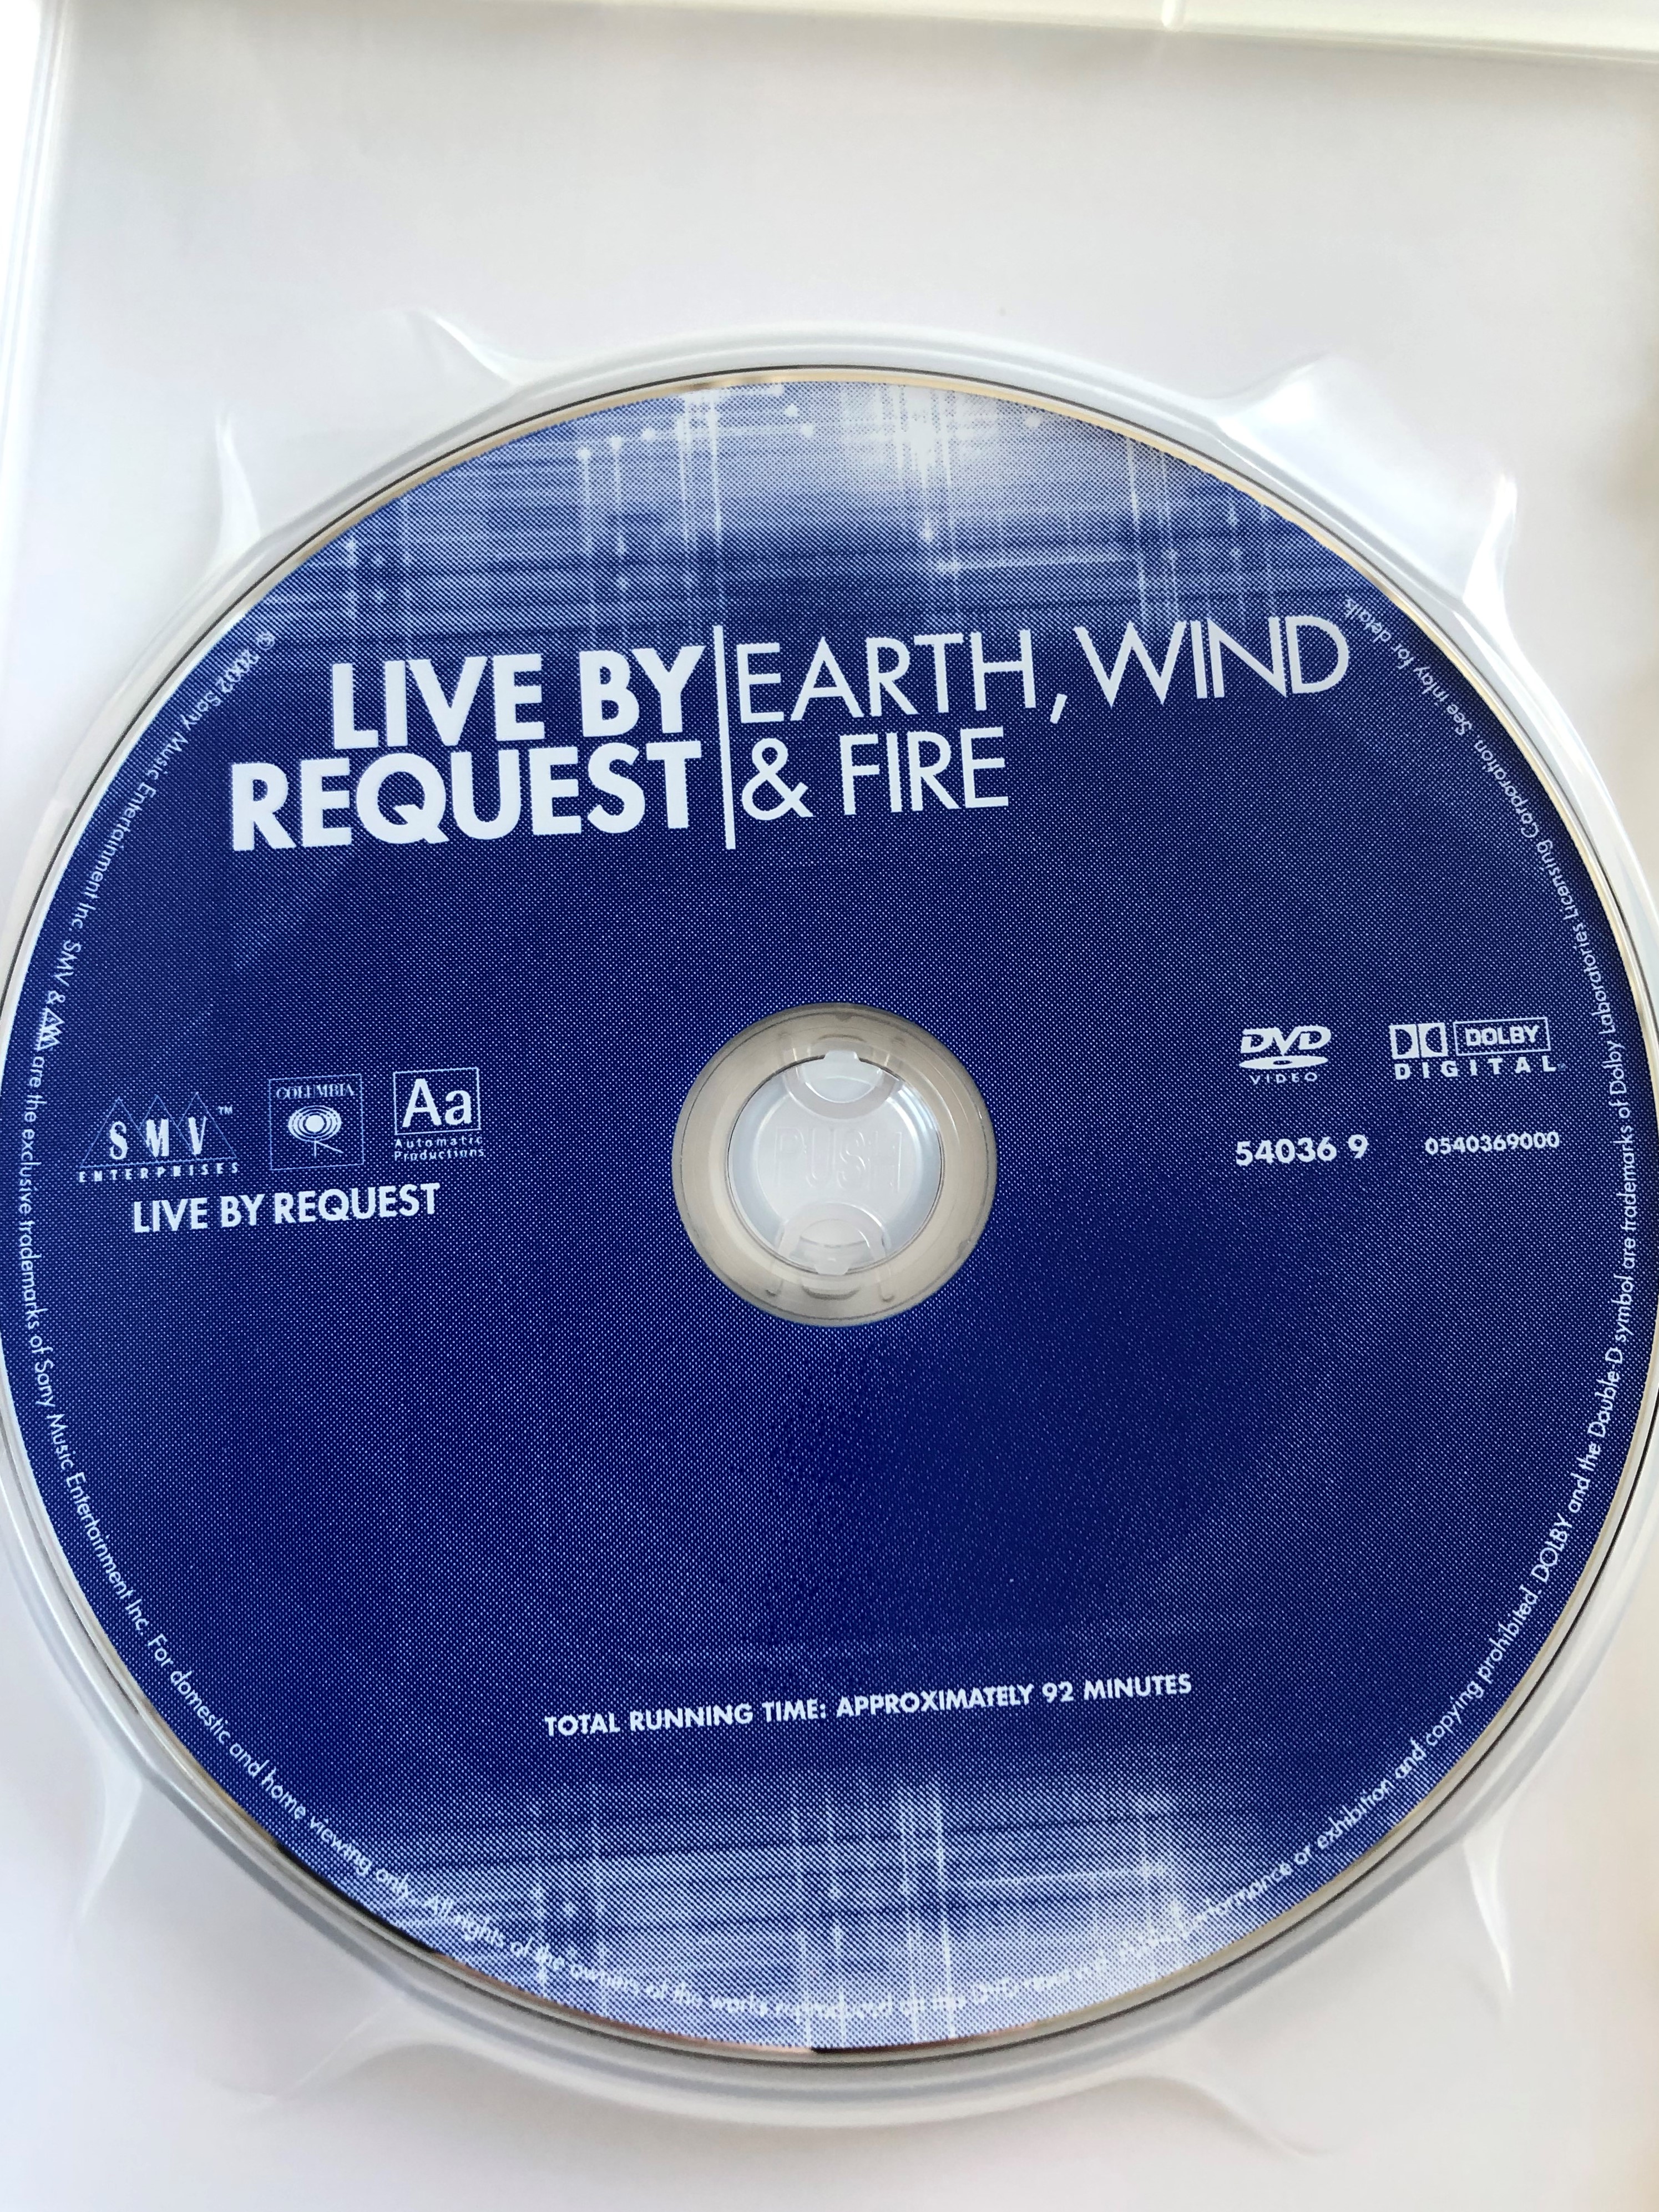 earth-wind-fire-dvd-2002-live-by-request-collectors-edition-2.jpg